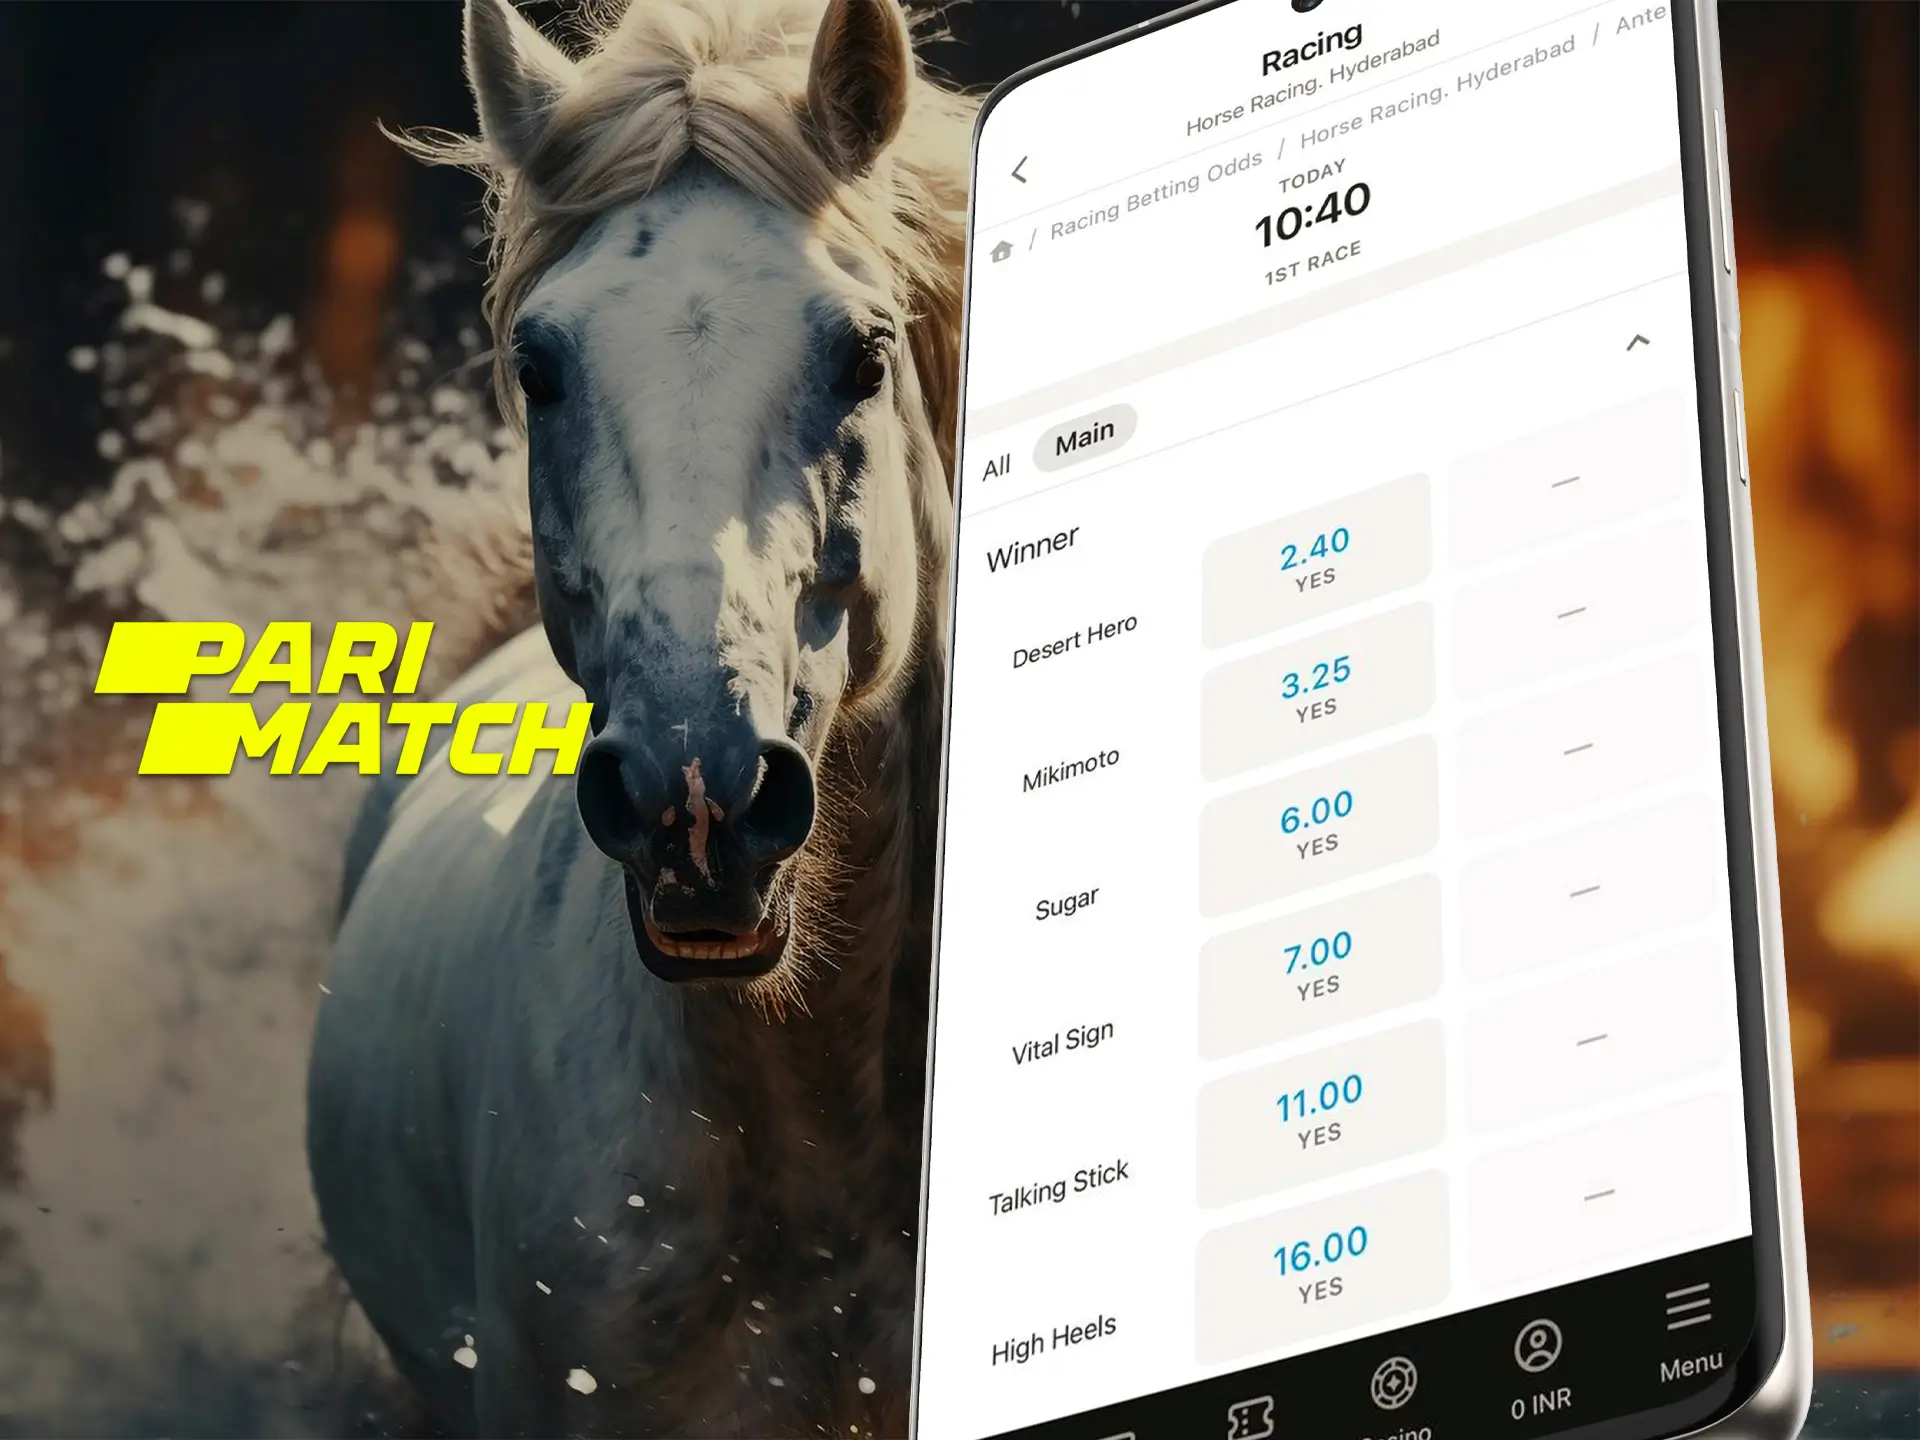 The Parimatch app is a great design and high odds when betting on horse racing.